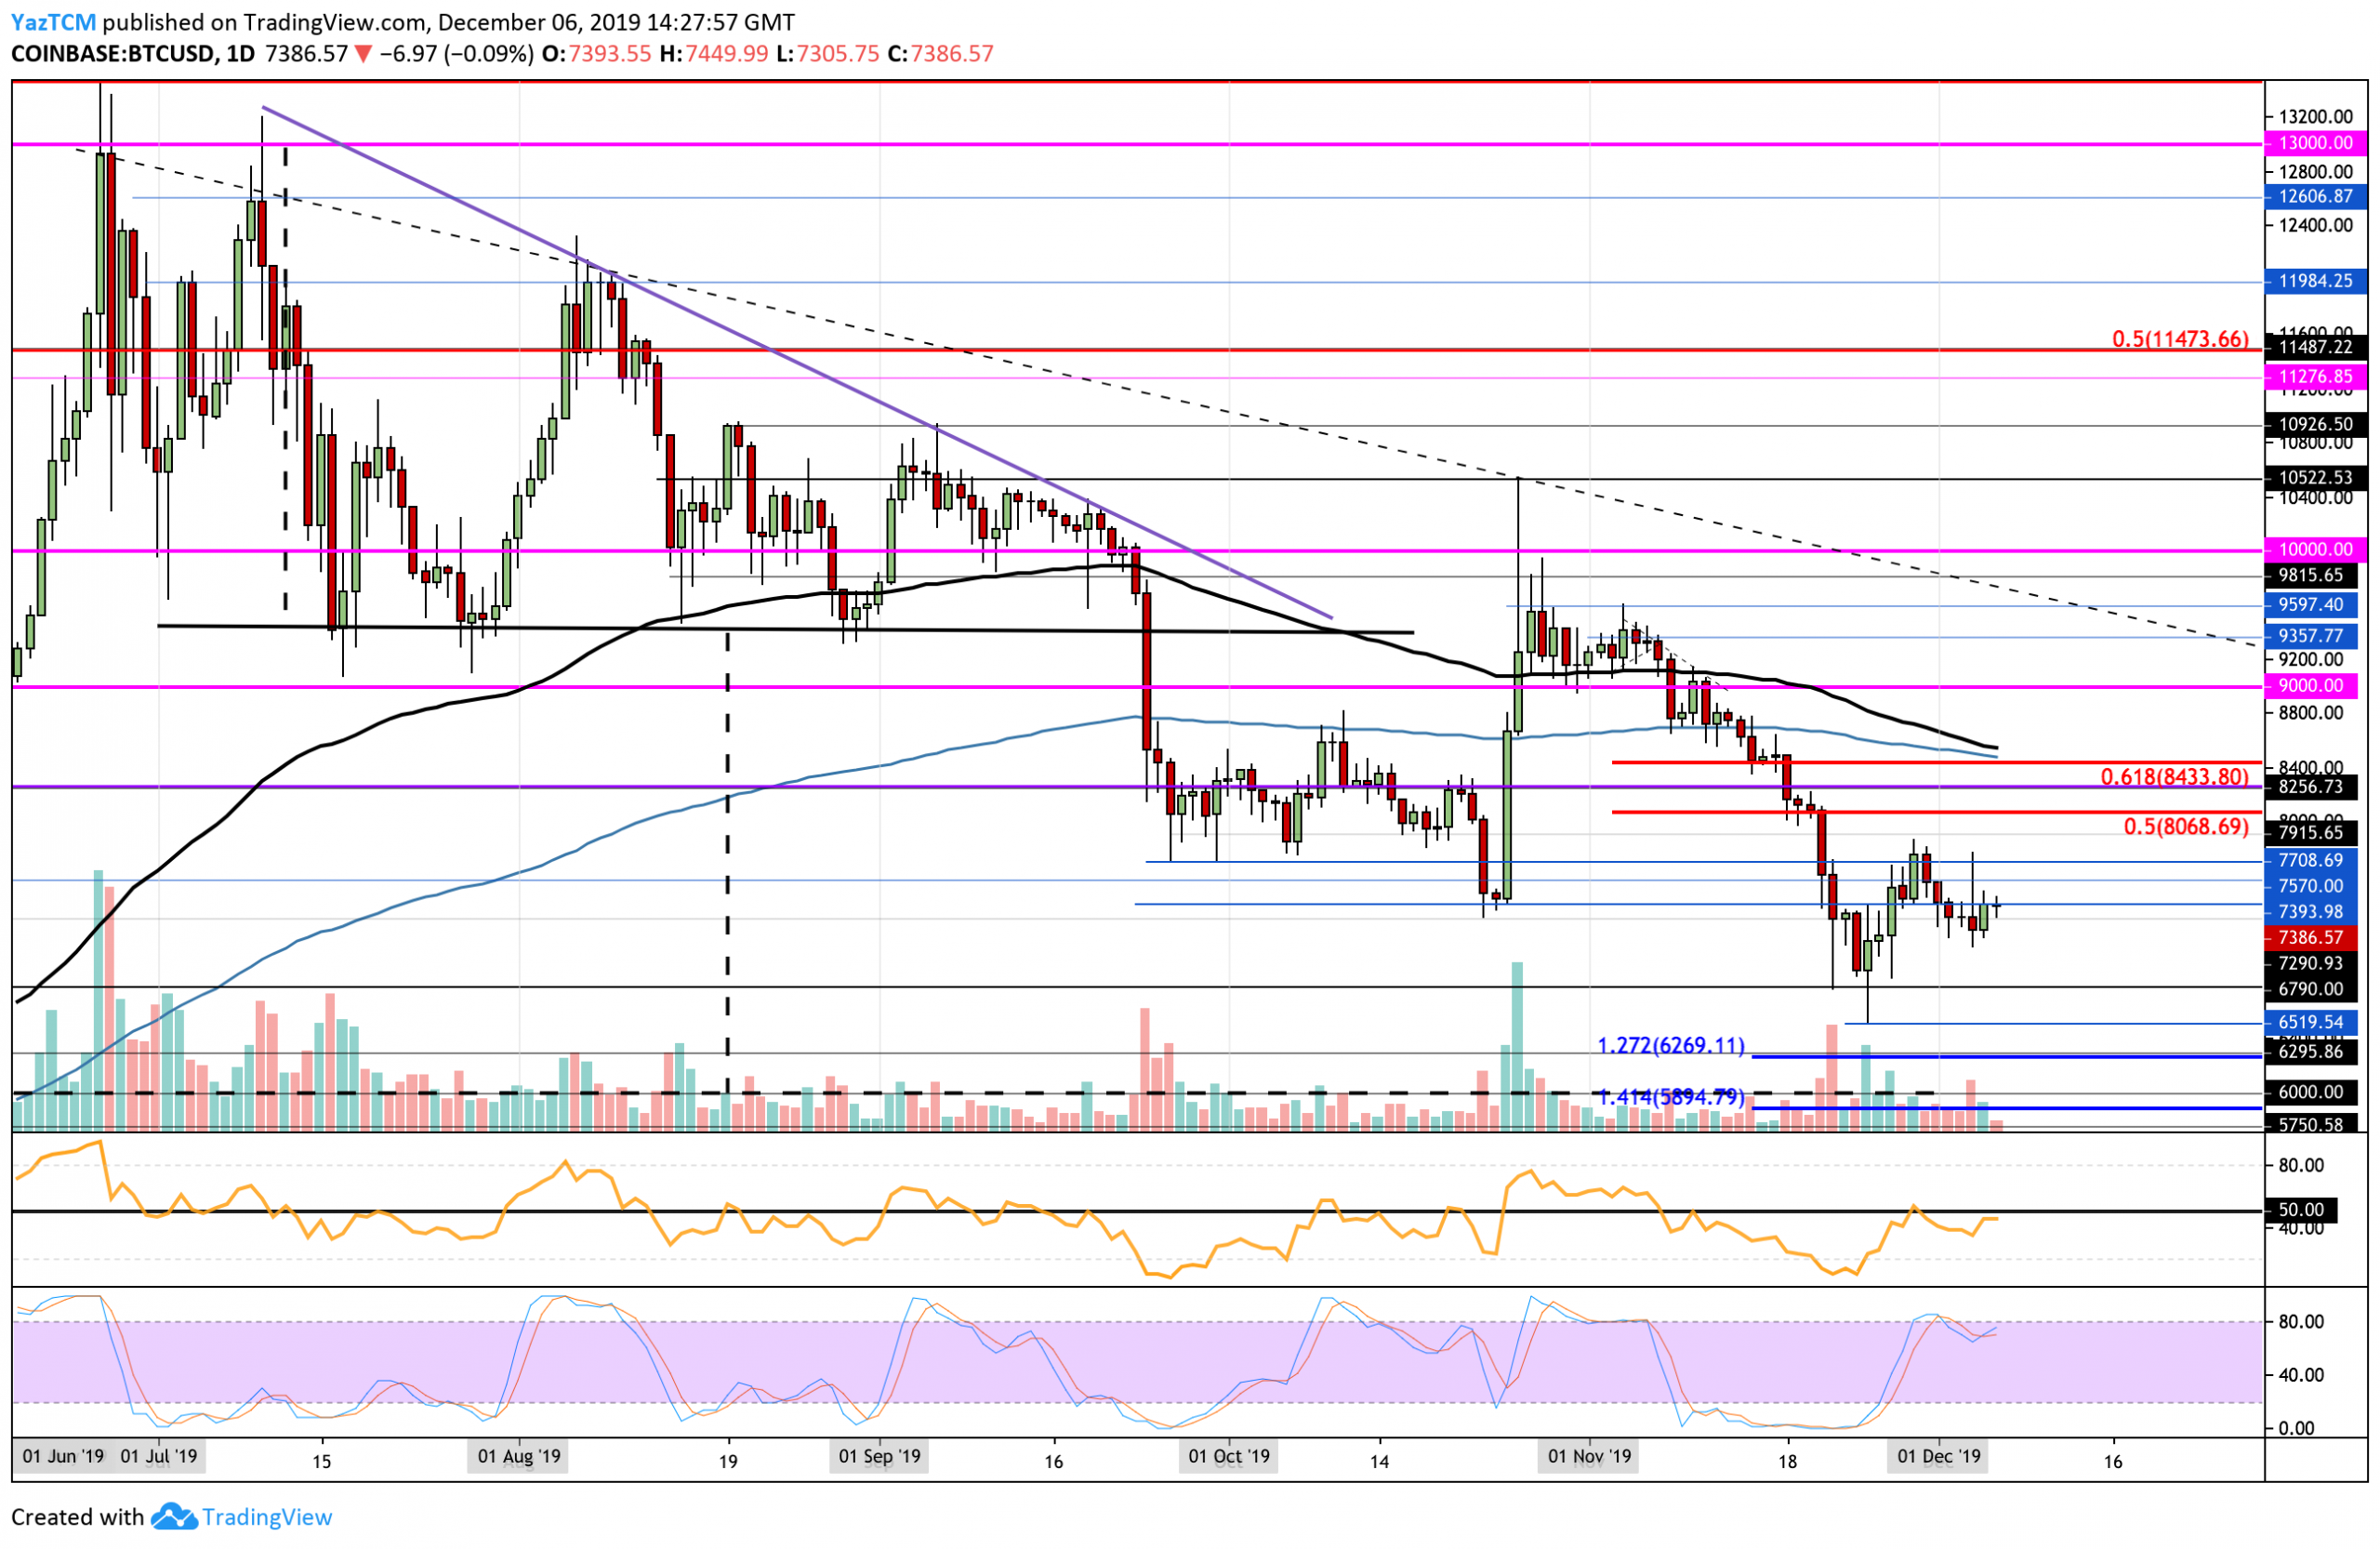 Crypto Price Analysis & Overview December 6th: Bitcoin, Ethereum, Ripple, Raven, and Matic